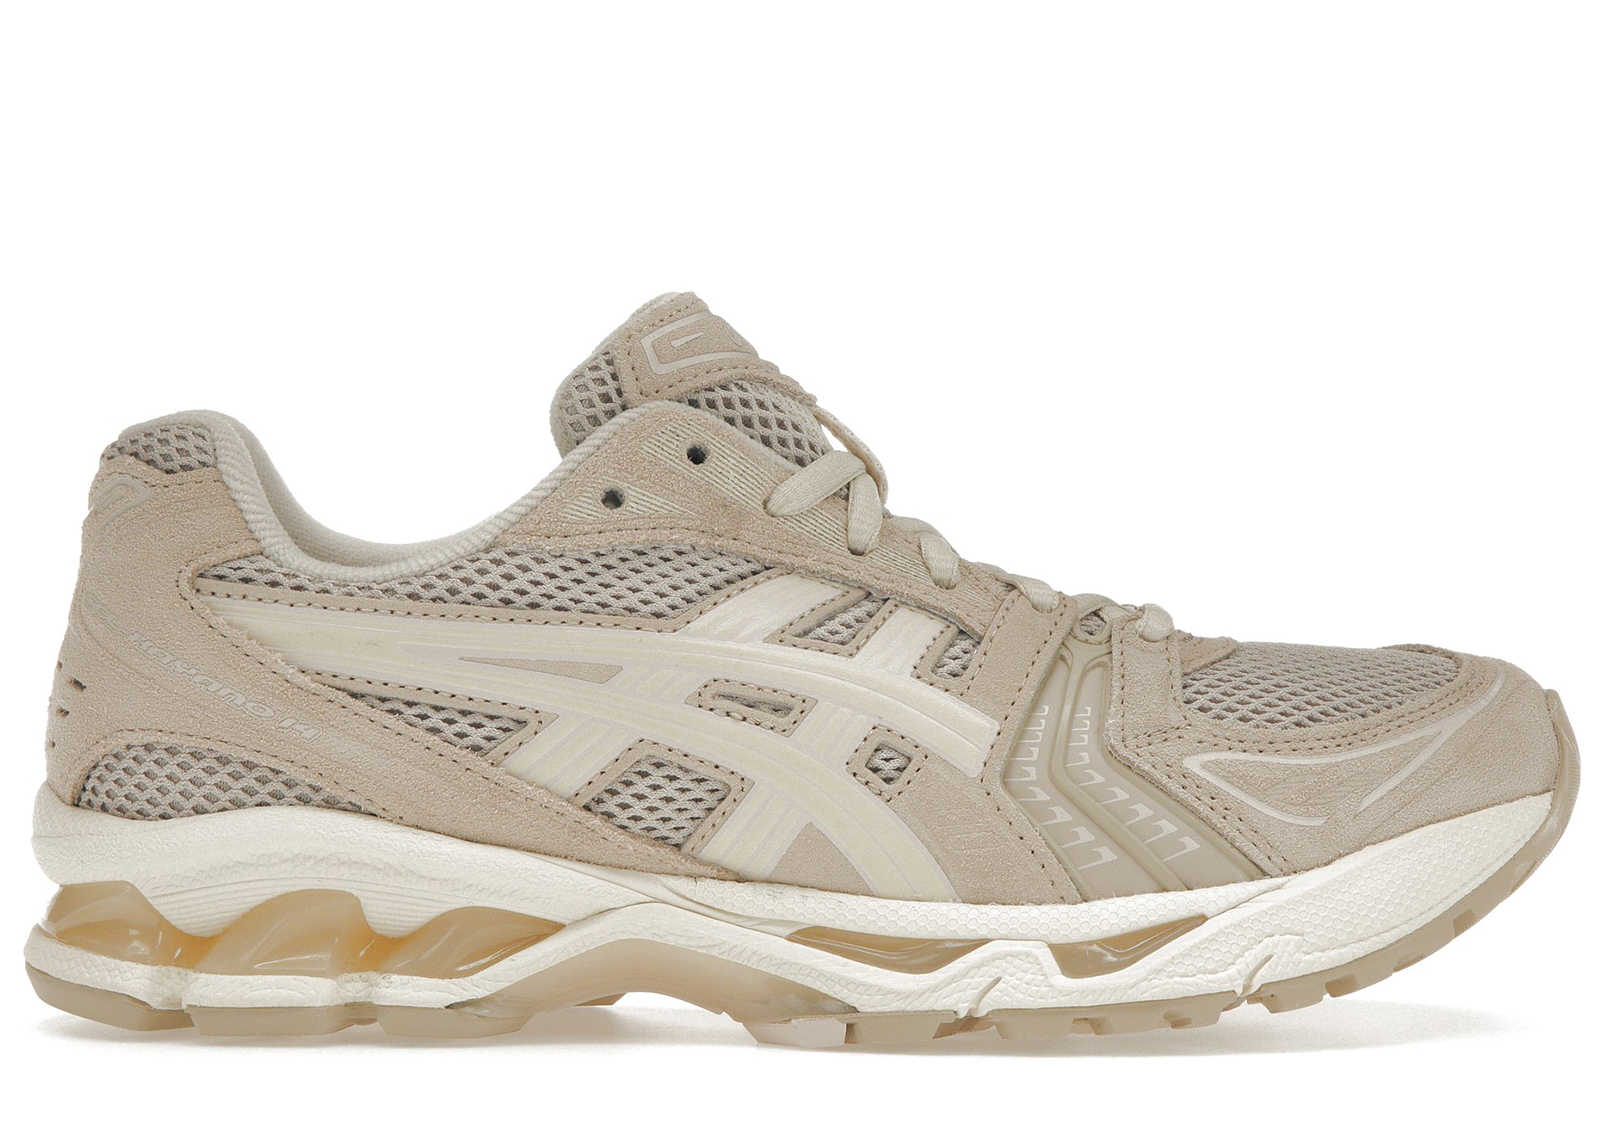 ASICS Gel-Kayano 14 Simply Taupe Oatmeal Men's - 1201A161-251 - US